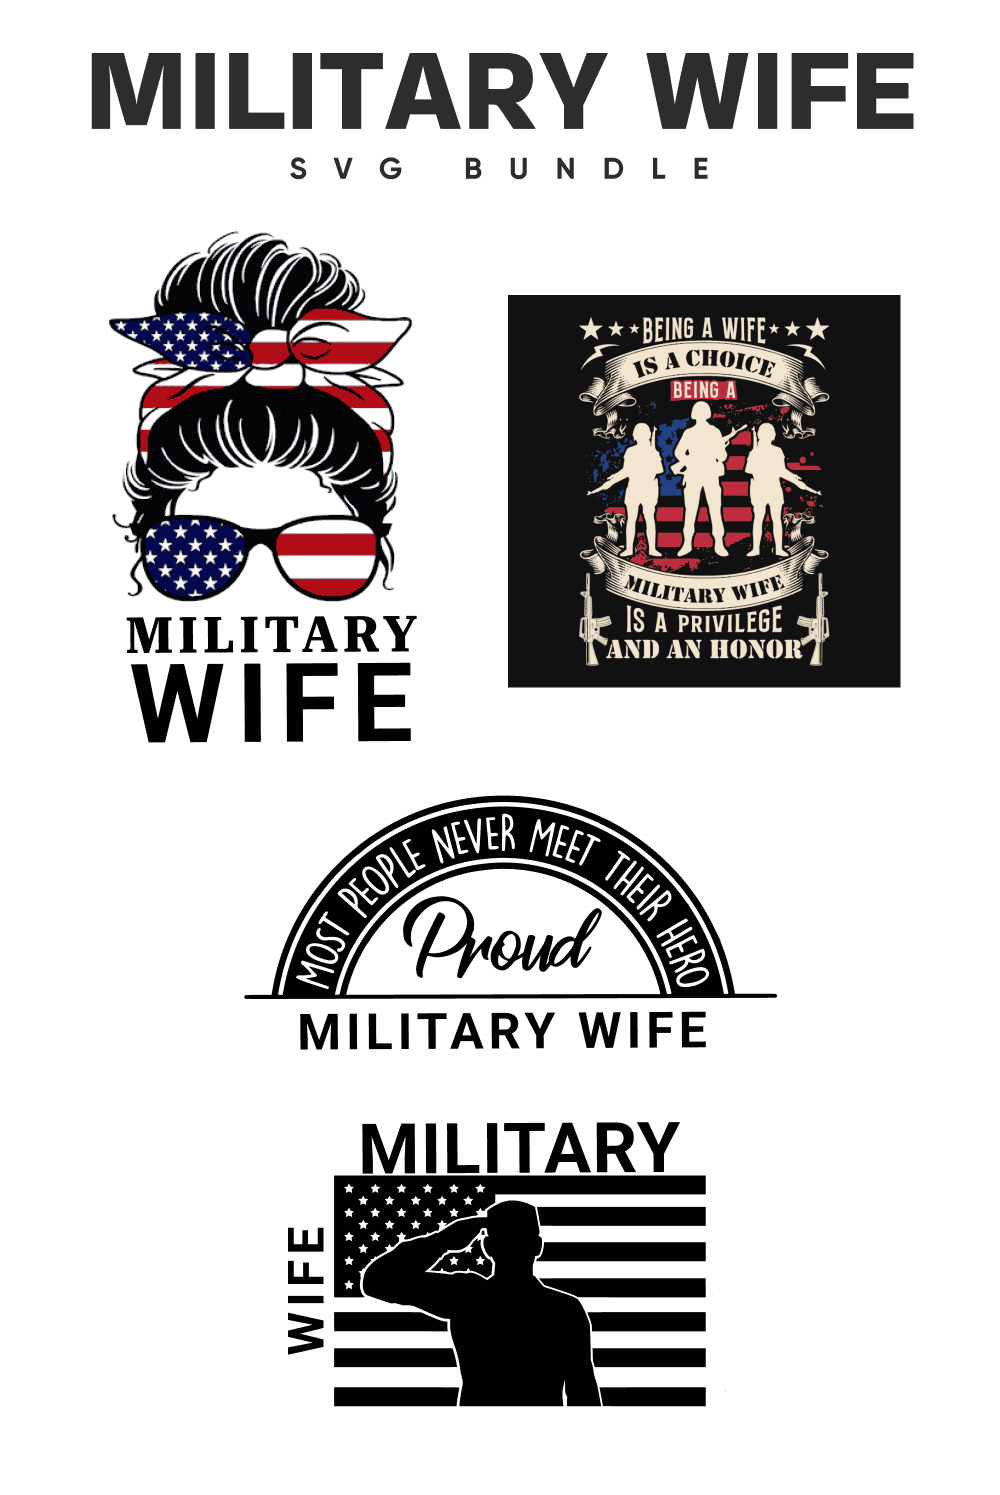 Four pictures with inscription "Military wife".